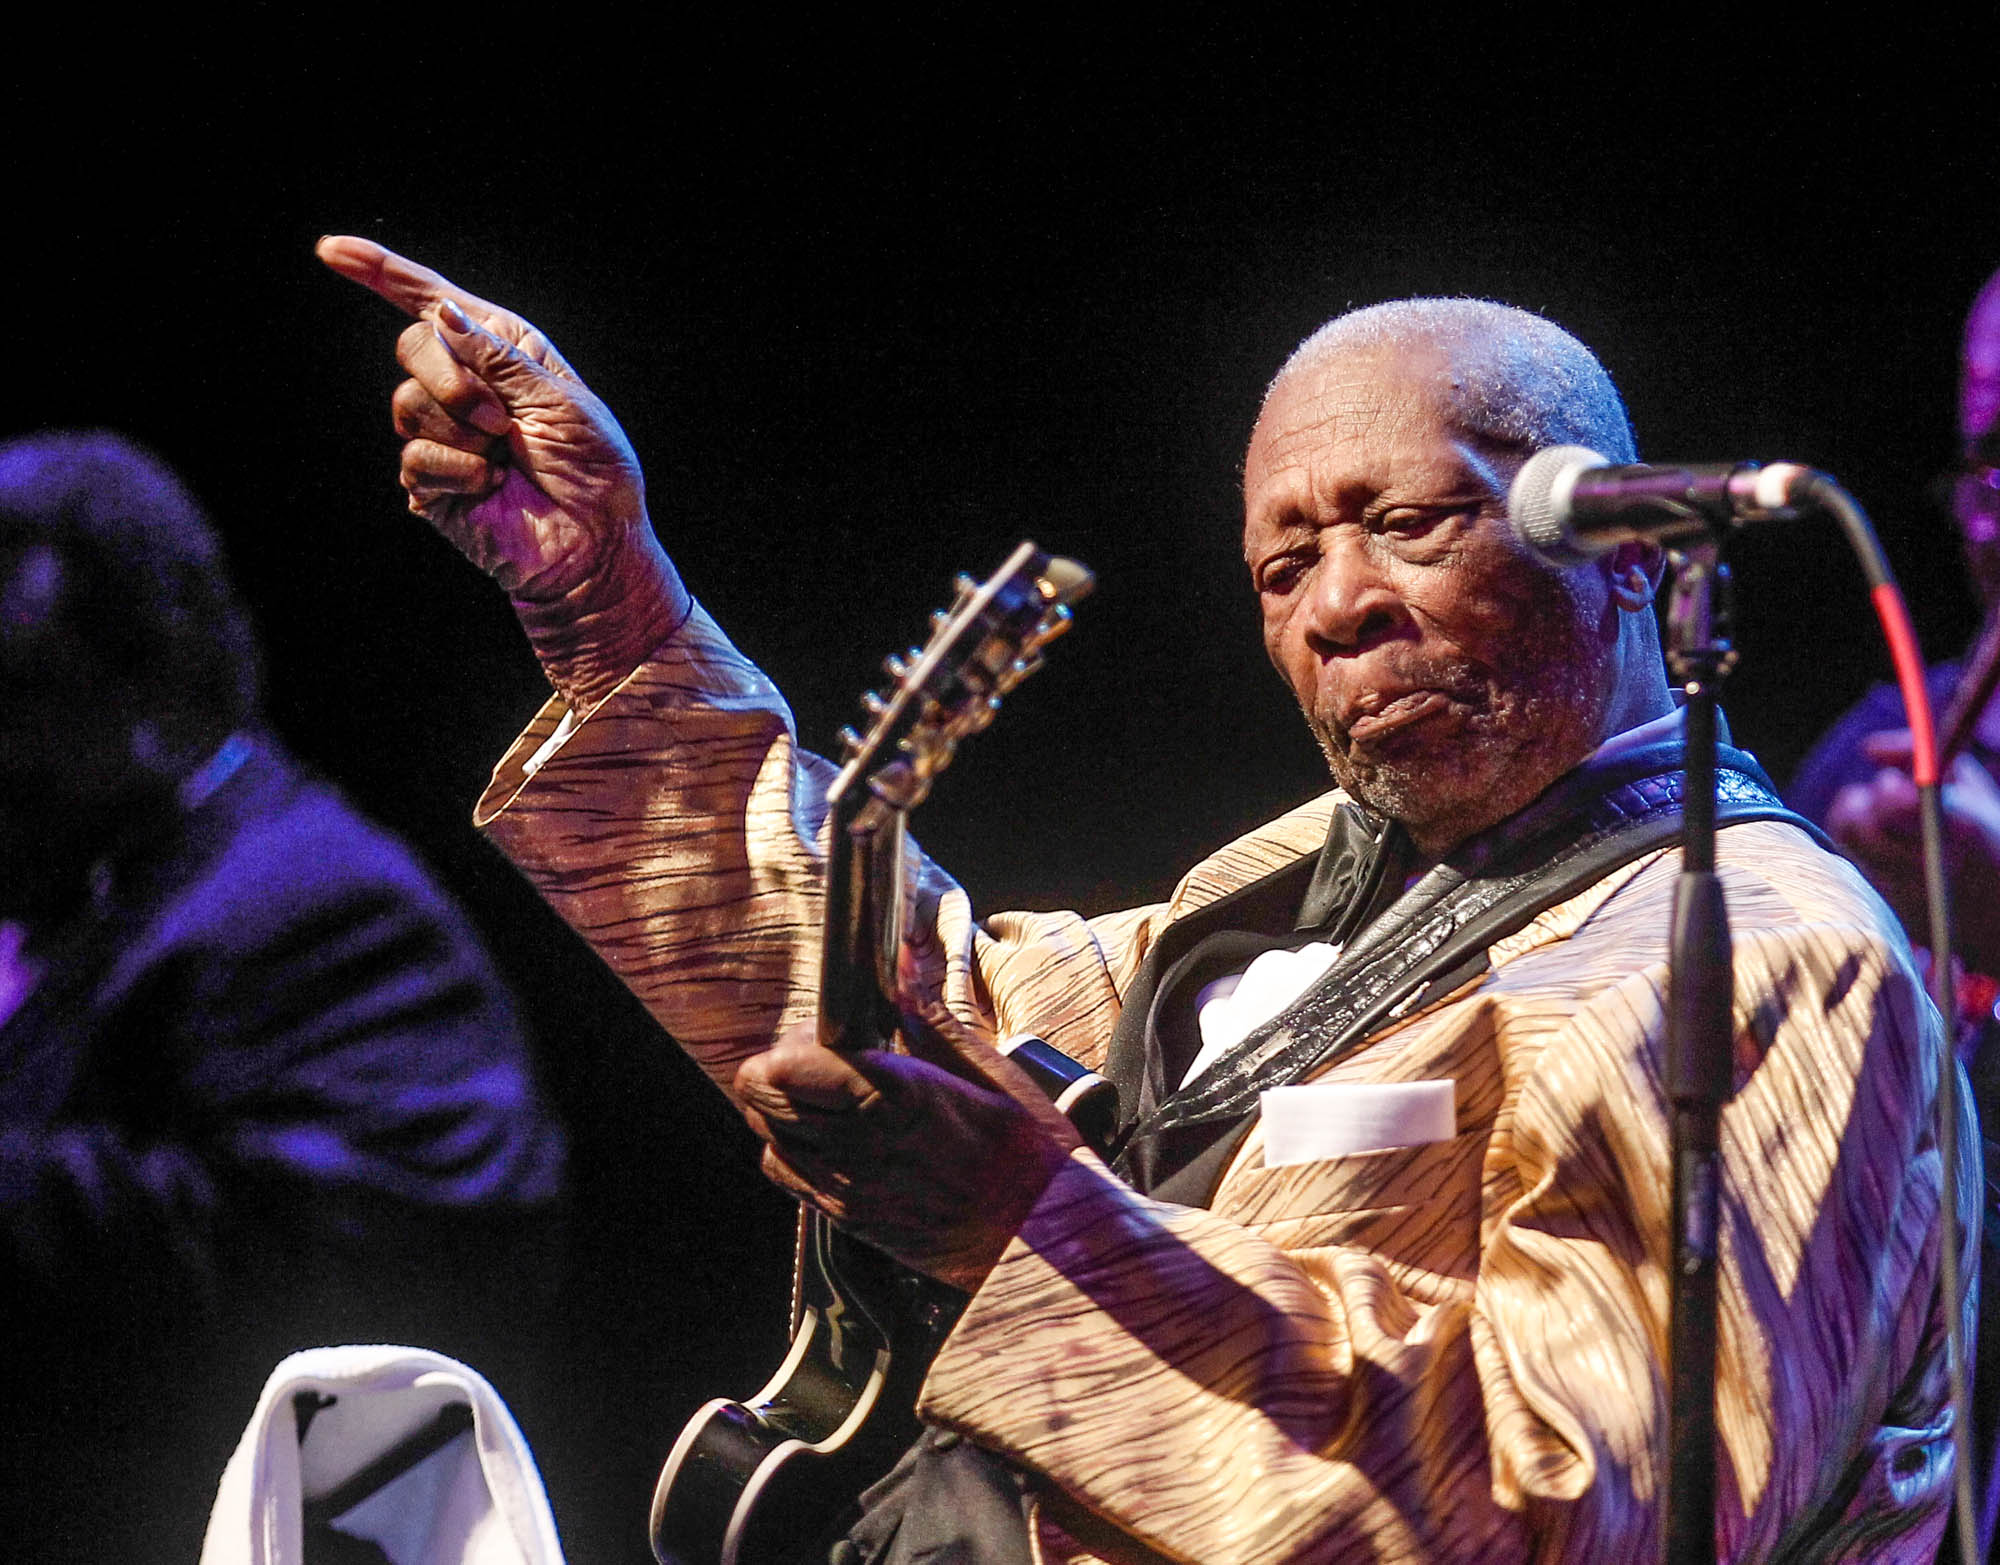 In this April 4, 2014 photo, B.B King performs at the Peabody Opera House on April 4, 2014 in St. Louis, Mo.  Some St. Louis music fans are singing the blues after an erratic weekend performance by 88-year-old guitar legend B.B. King led to a stream of early departures and audience catcalls.  Concert-goers say Kings rambling Friday night set at the Peabody Opera House included only a handful of complete songs amid musical snippets, long-winded soliloquies and a 15-minute sing-along of You Are My Sunshine.  (AP Photo/St. Louis Post-Dispatch, Sarah Conard)  EDWARDSVILLE INTELLIGENCER OUT; THE ALTON TELEGRAPH OUT